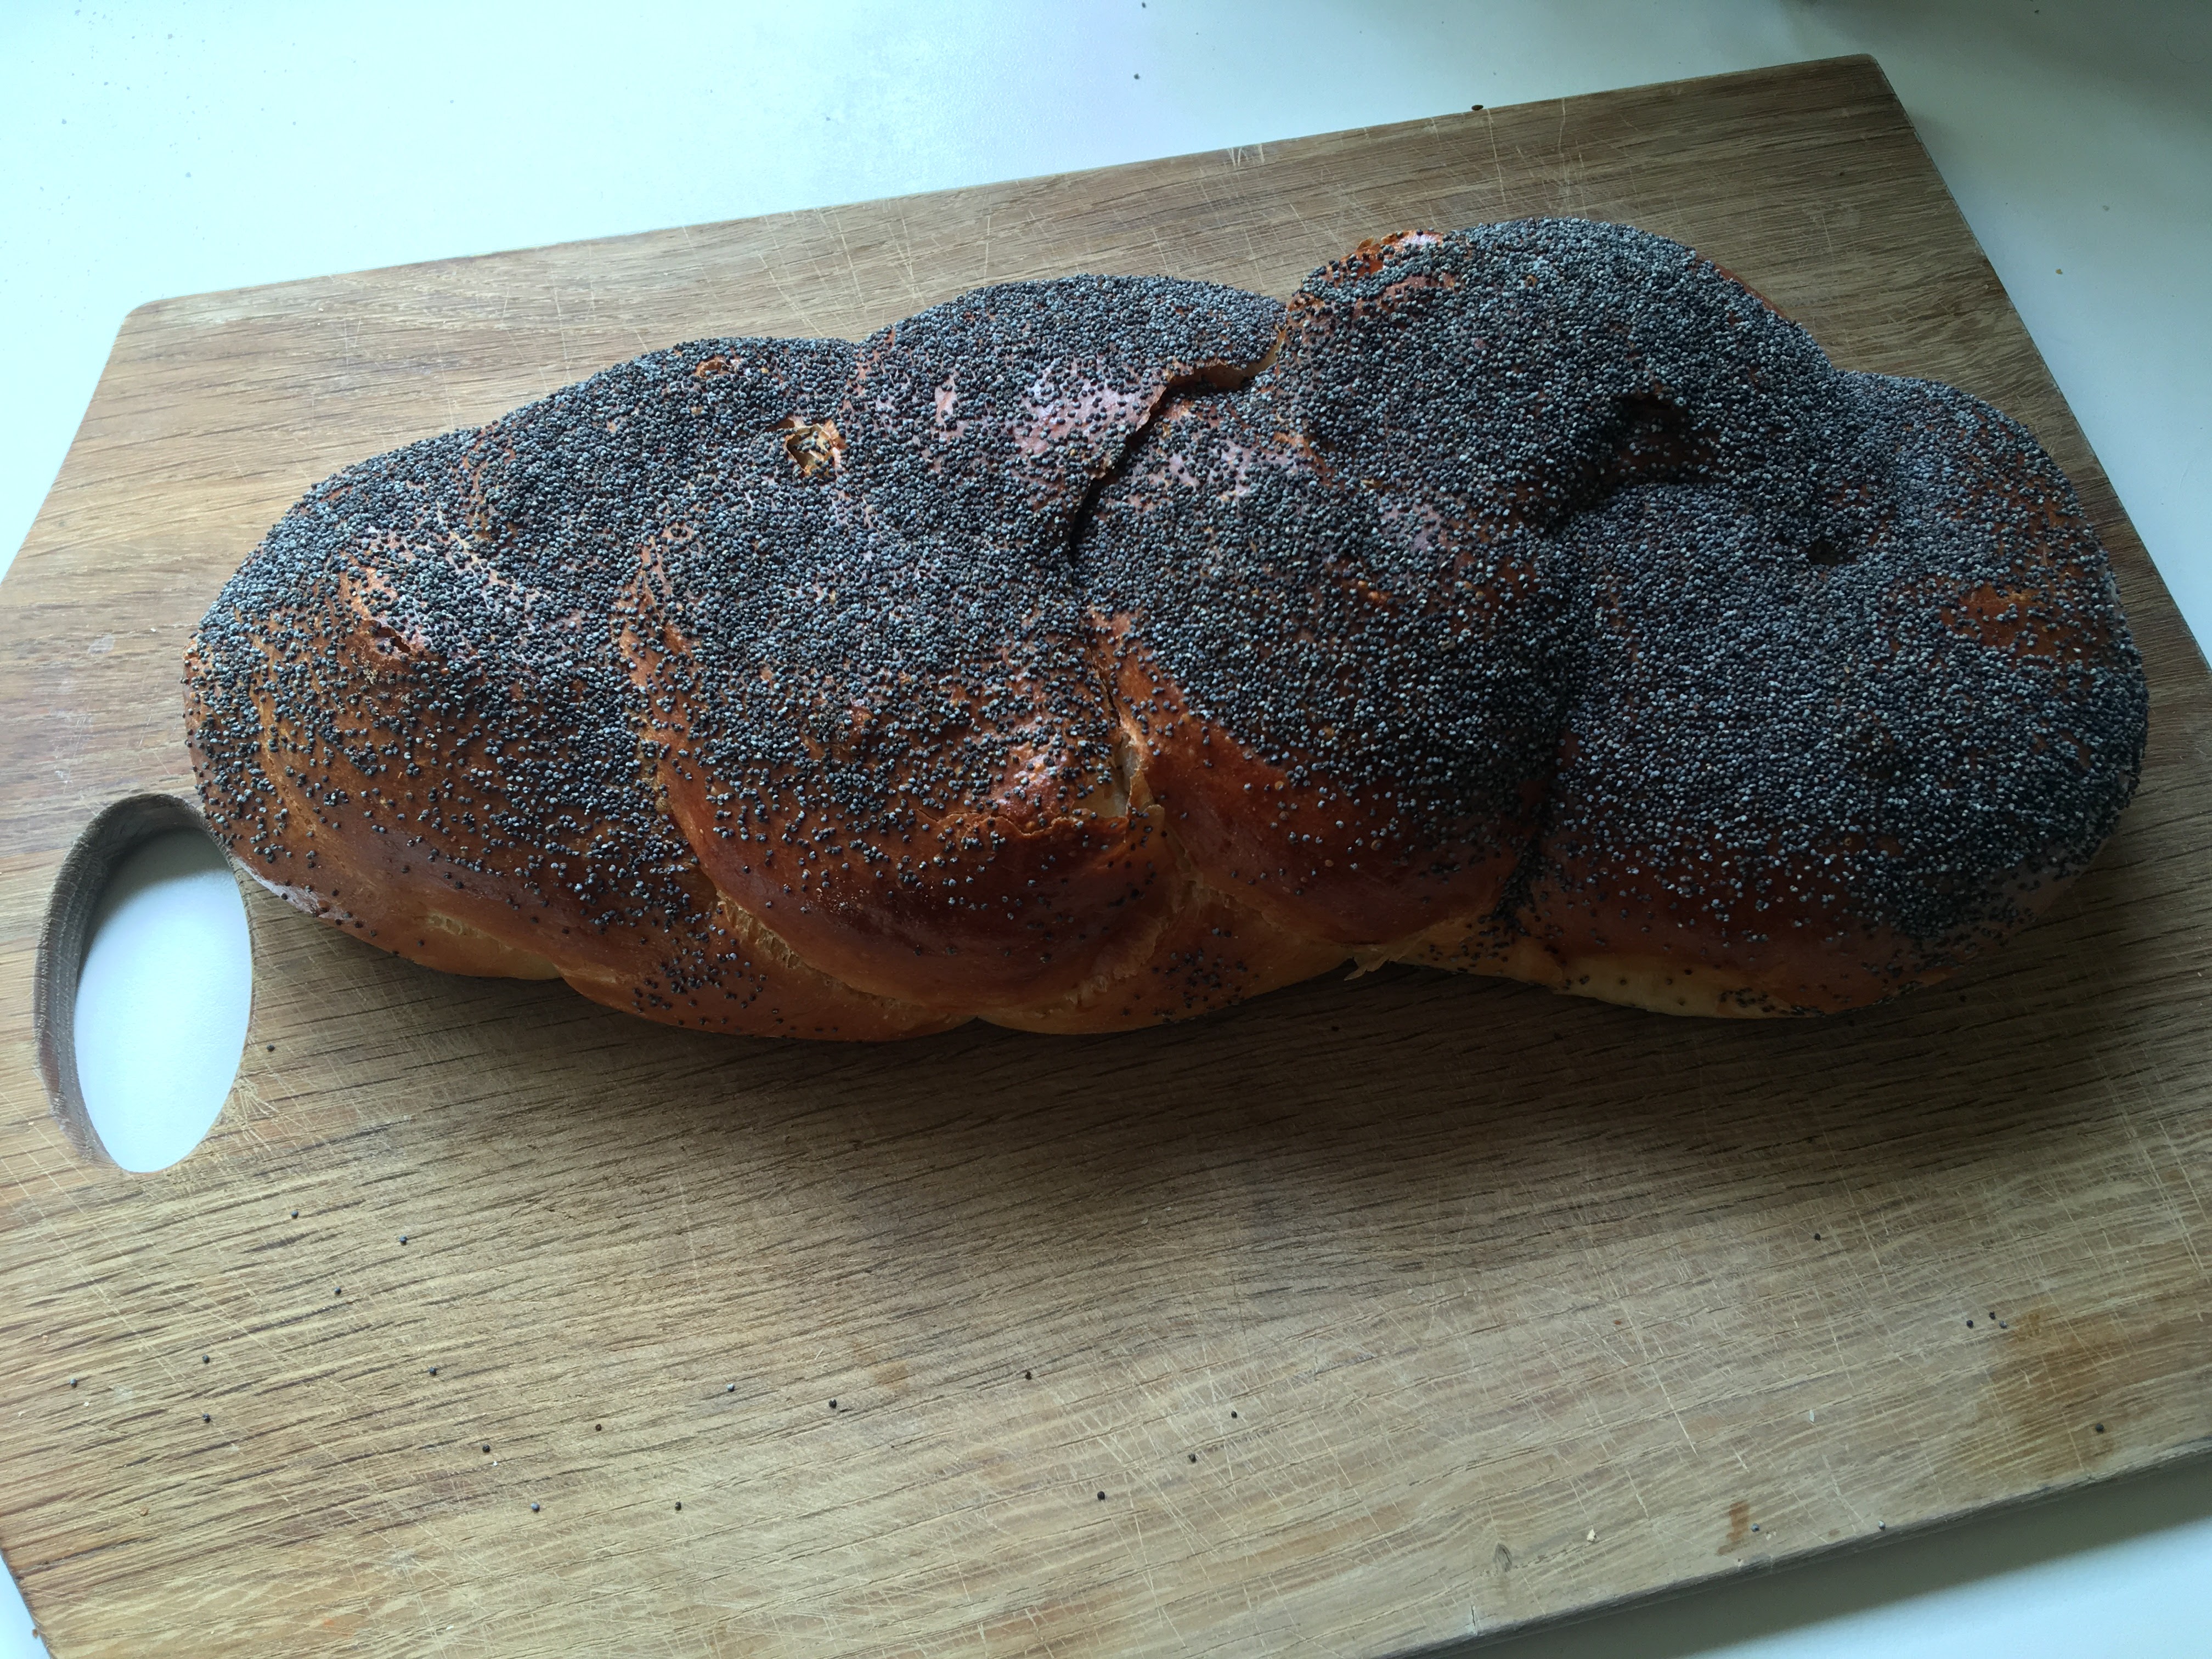 A challah load from Marks Bread